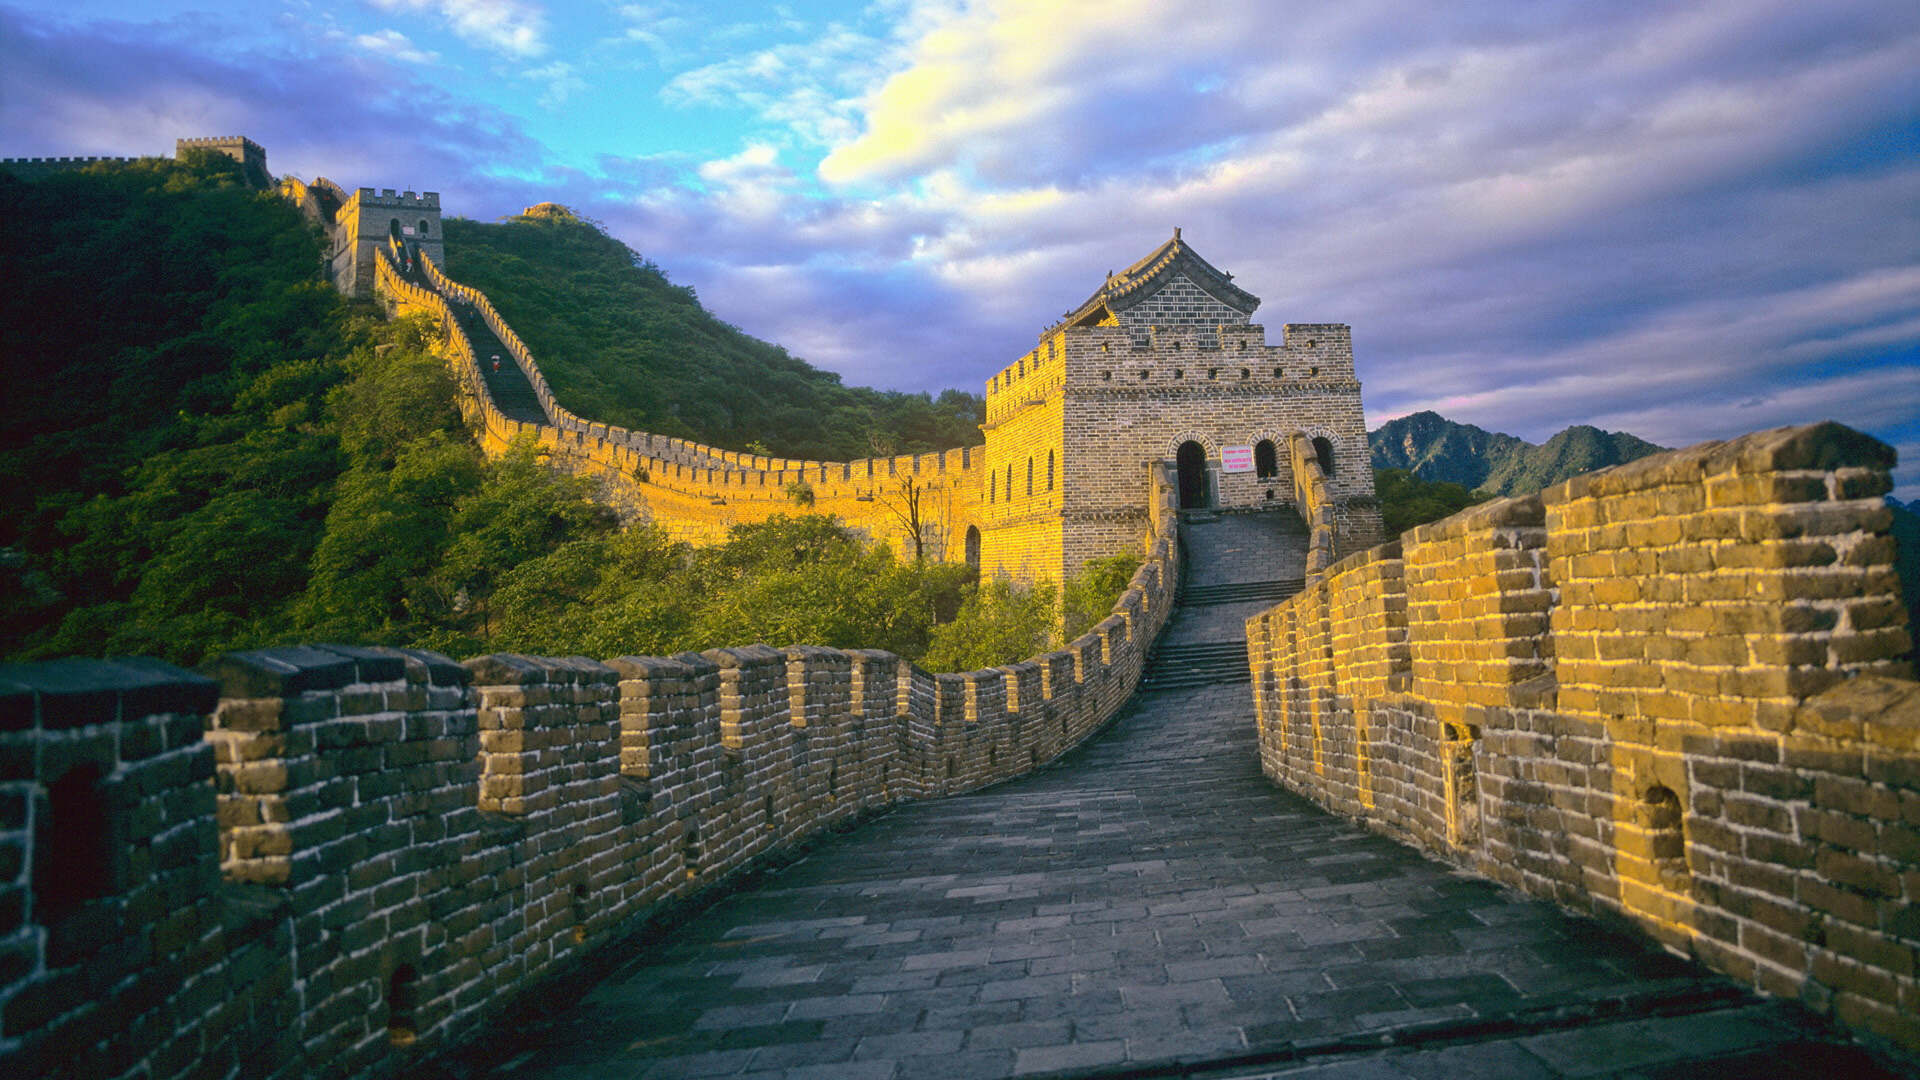 What Are Two Civil Engineering Projects Reconstructed During The Ming Dynasty?